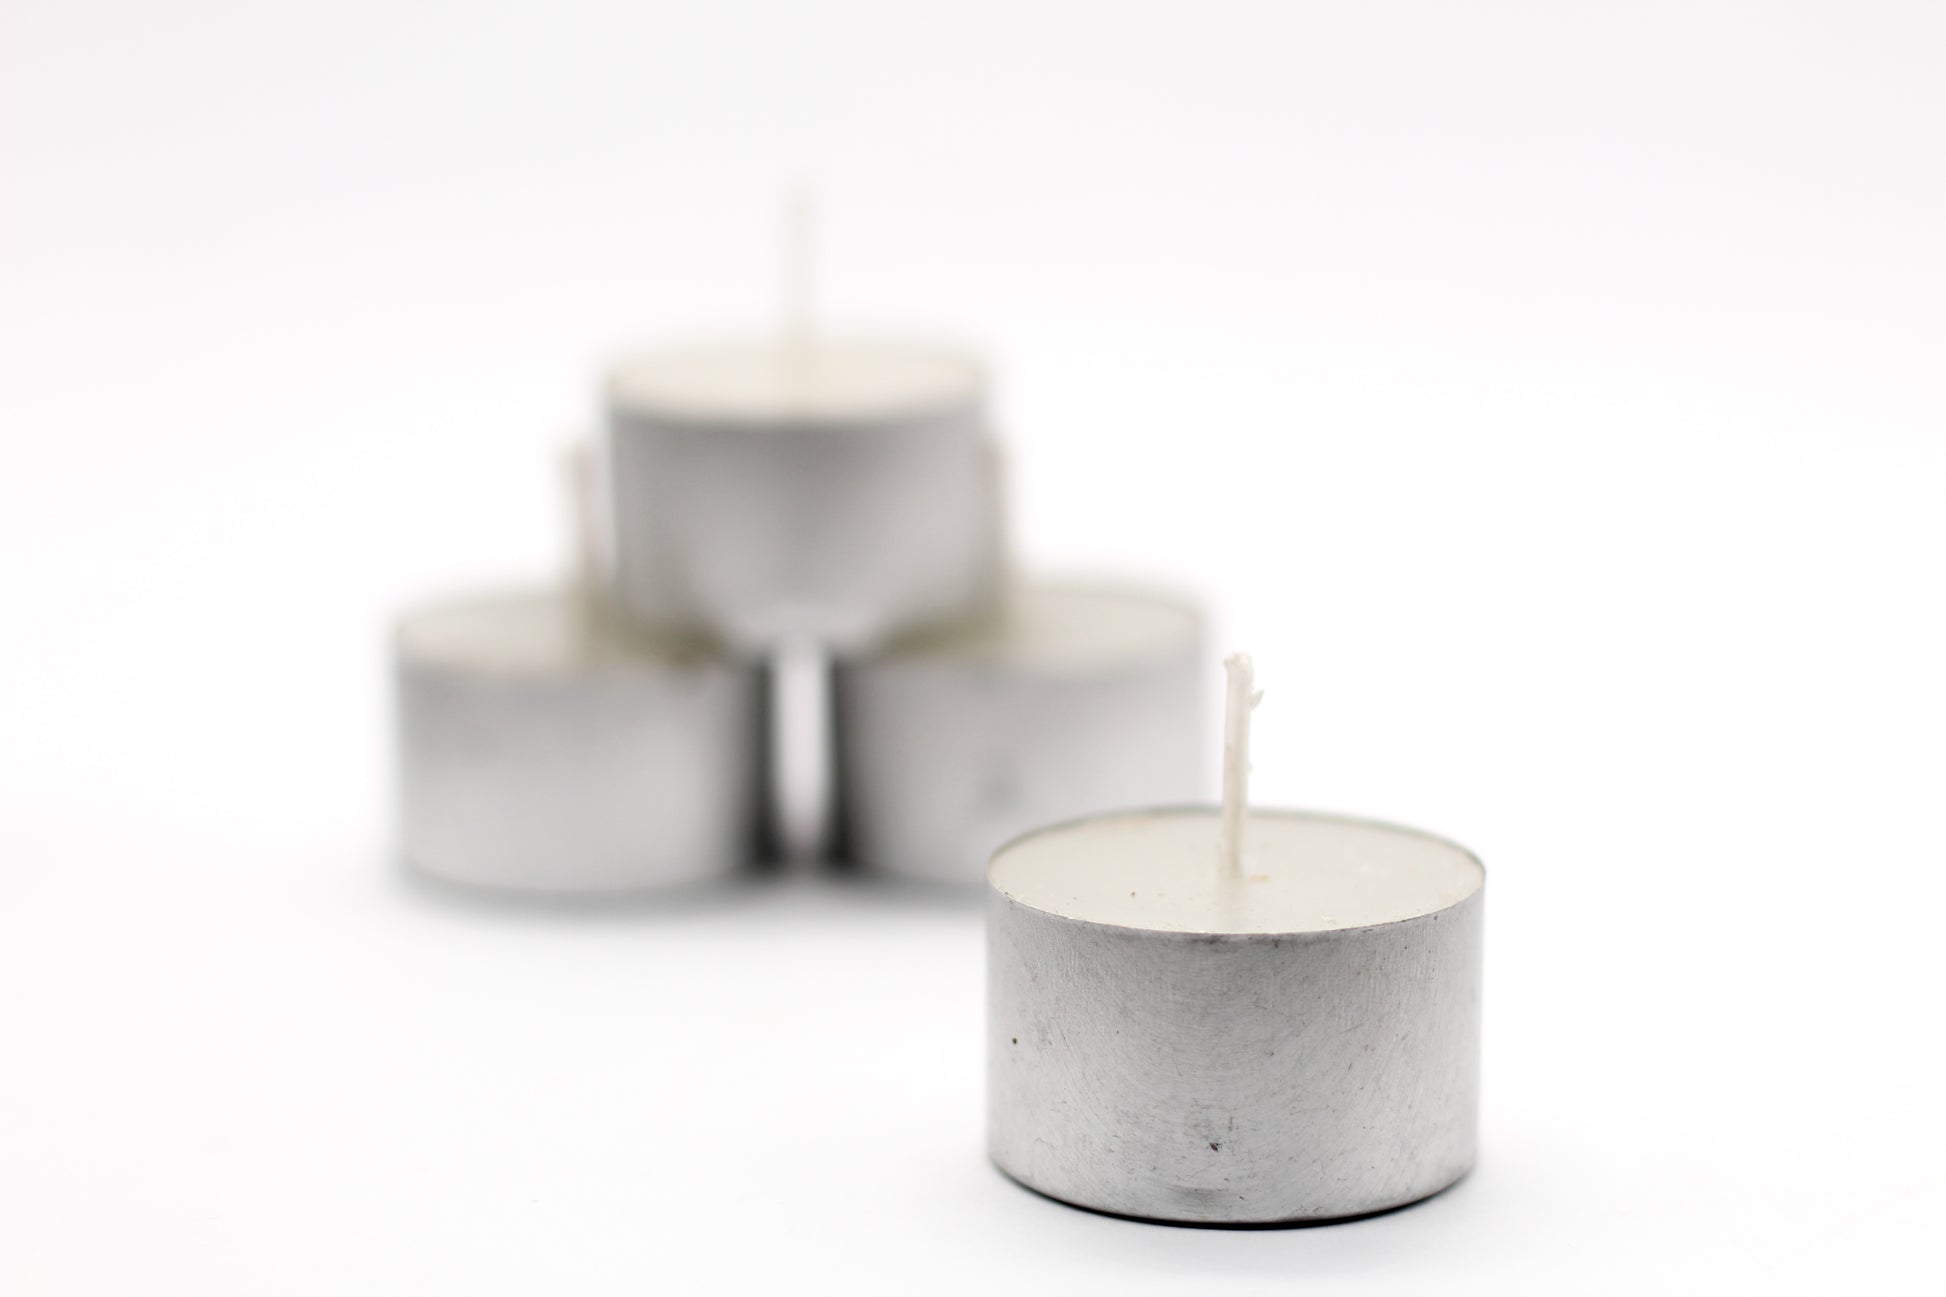 3.5cm Wholesale Smokeless Cotton Candle Wicks For Candle DIY - Buy 3.5cm  Wholesale Smokeless Cotton Candle Wicks For Candle DIY Product on